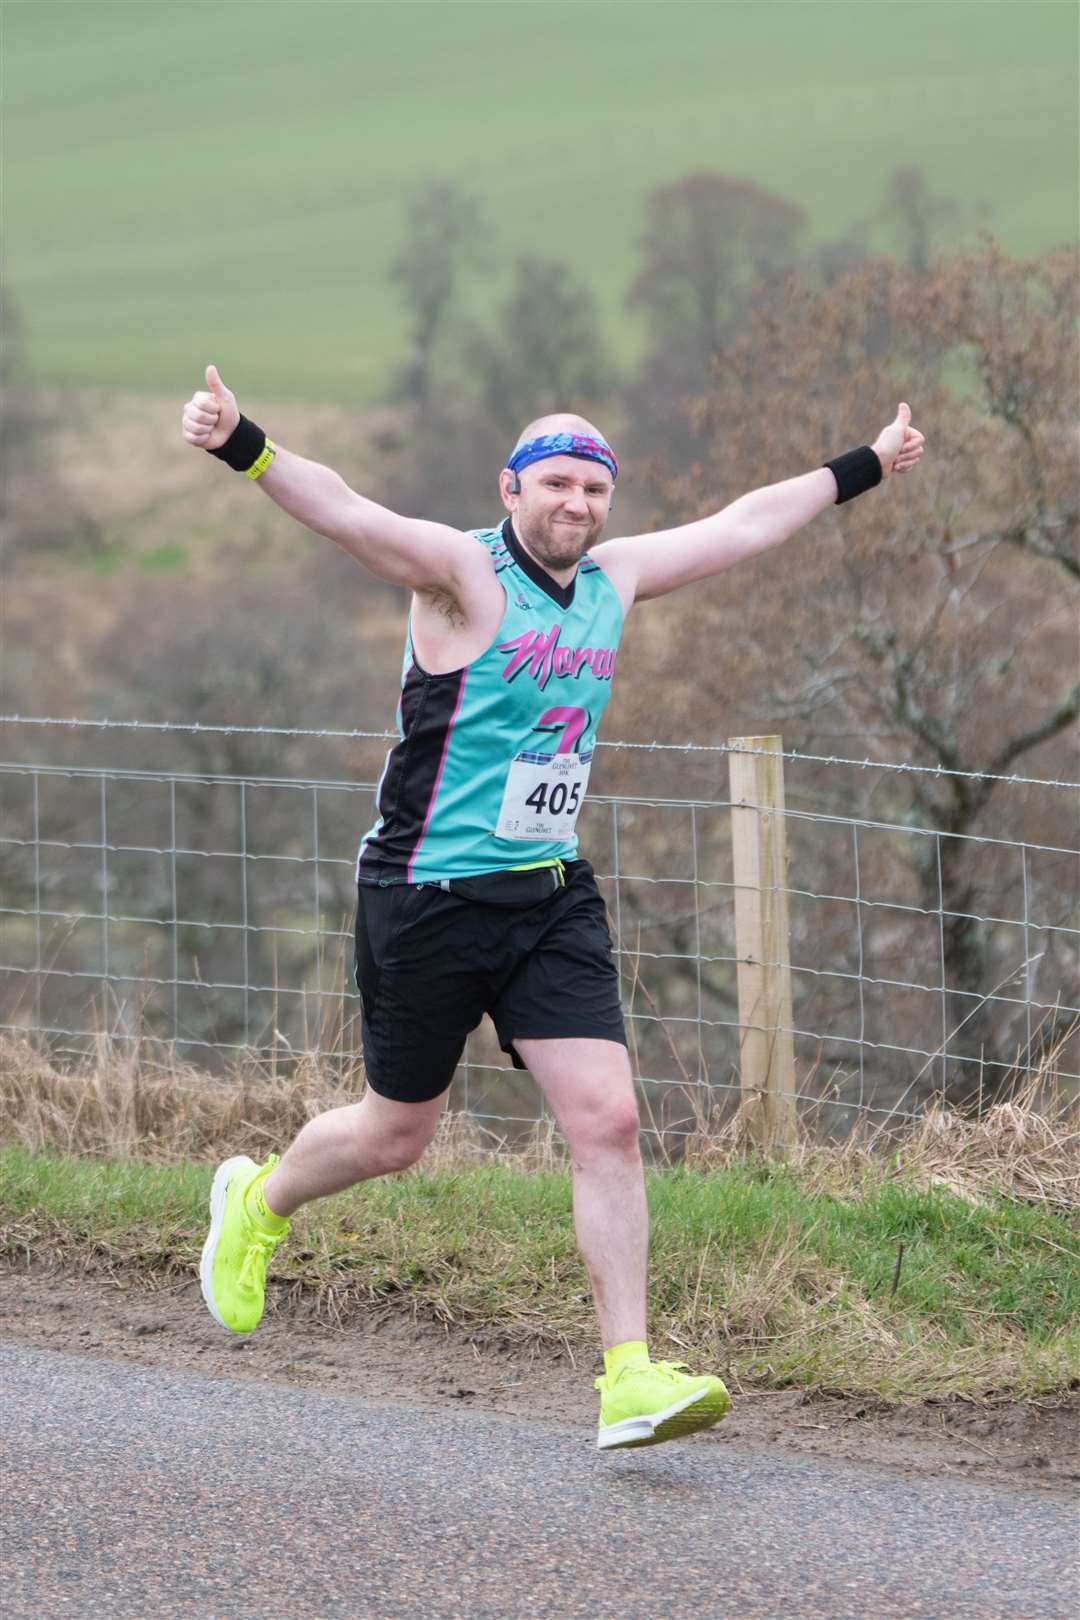 A cheer from #405 Matthew Wilson as he approaches the finishline to finish in a time of 46:35...2023 Glenlivet 10k Race, which raises money for Chest Heart & Stroke Scotland. .. Picture: Daniel Forsyth..